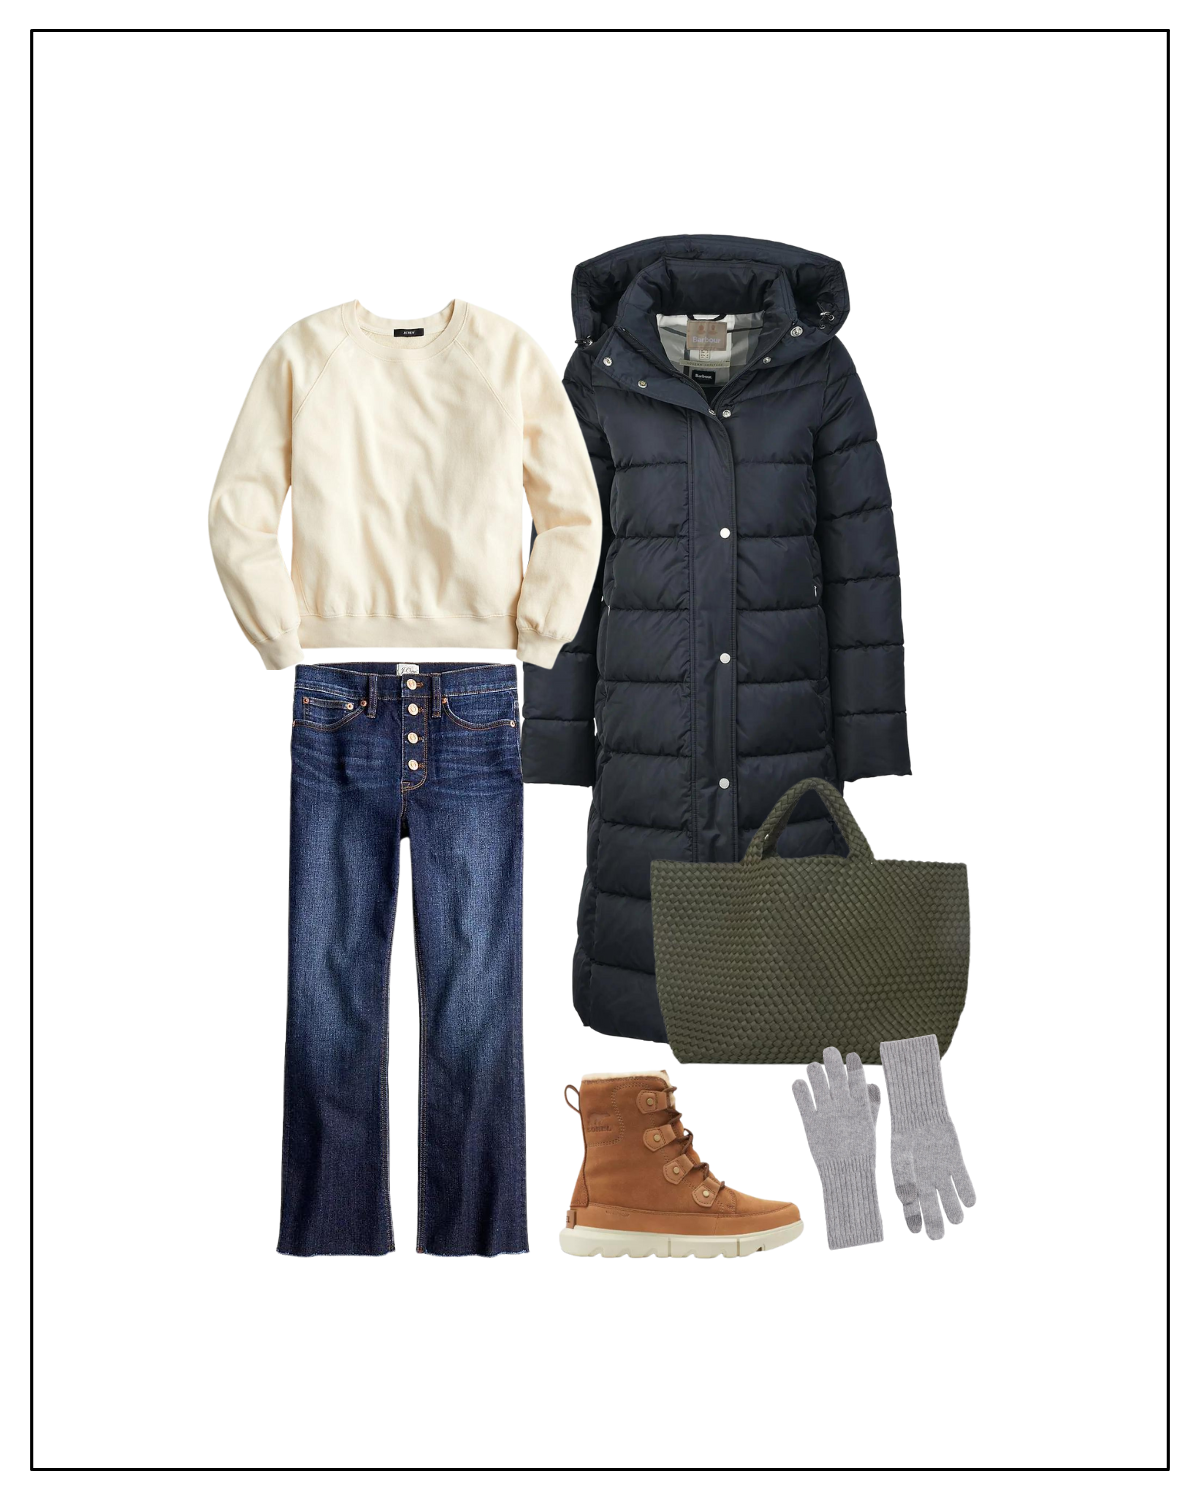 Winter walk outfit